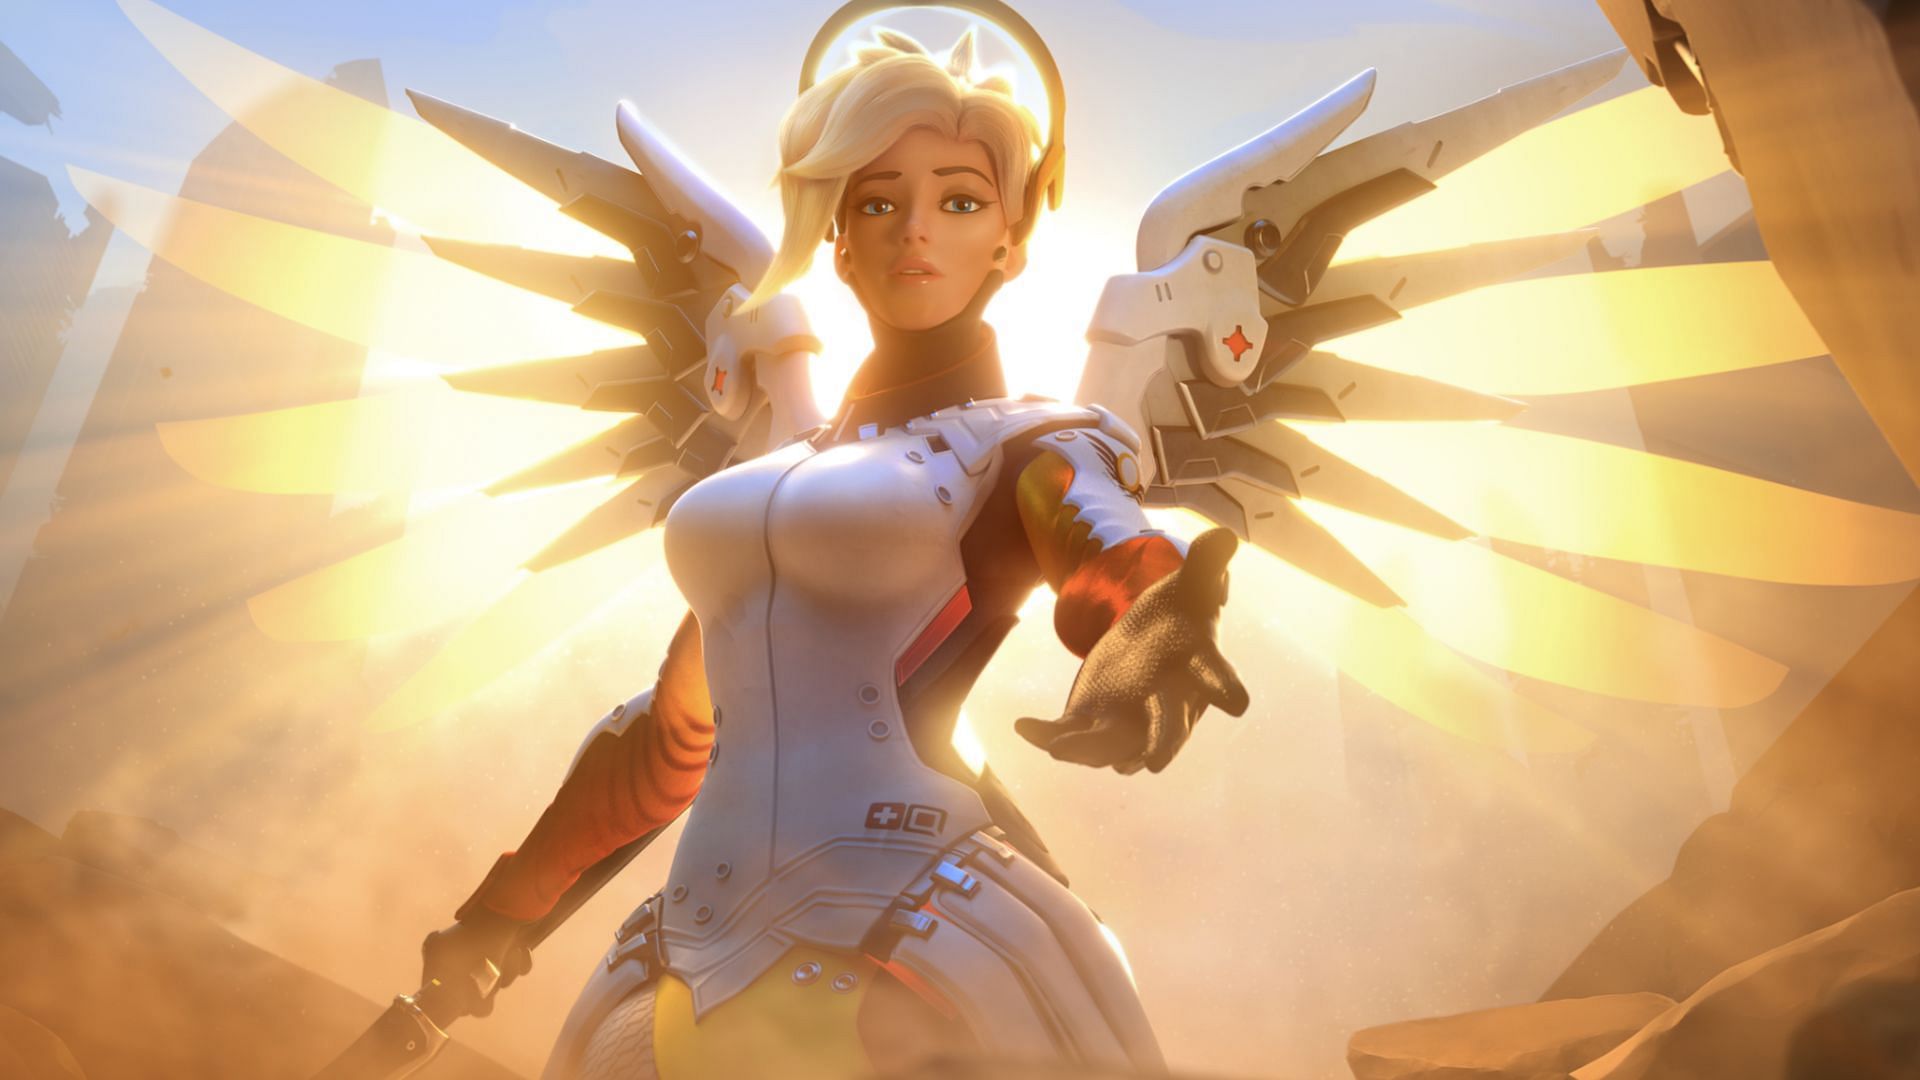 Sneak peek at some of the best Overwatch 2 compositions for Mercy (Image via Sportskeeda and Blizzard Entertainment)